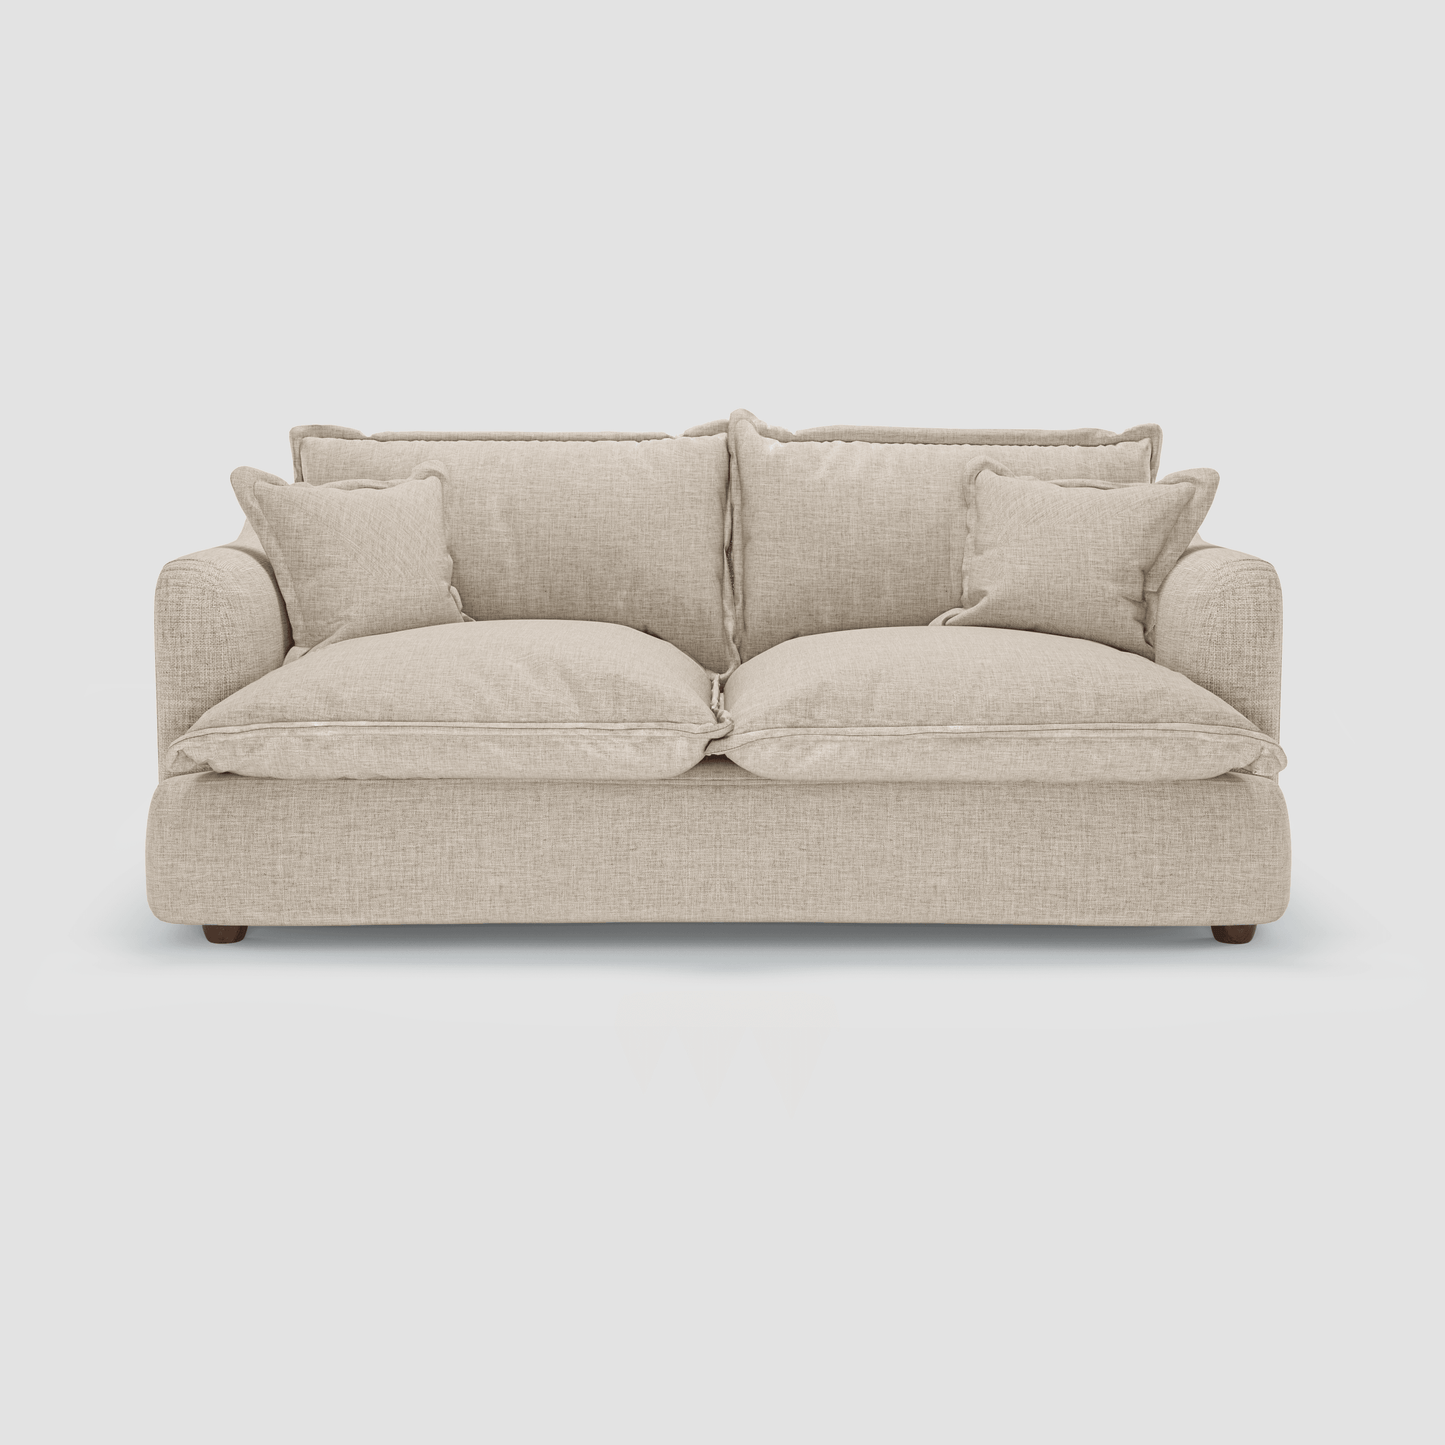 Marlie Large Two Seater Sofa - Flown the Coop